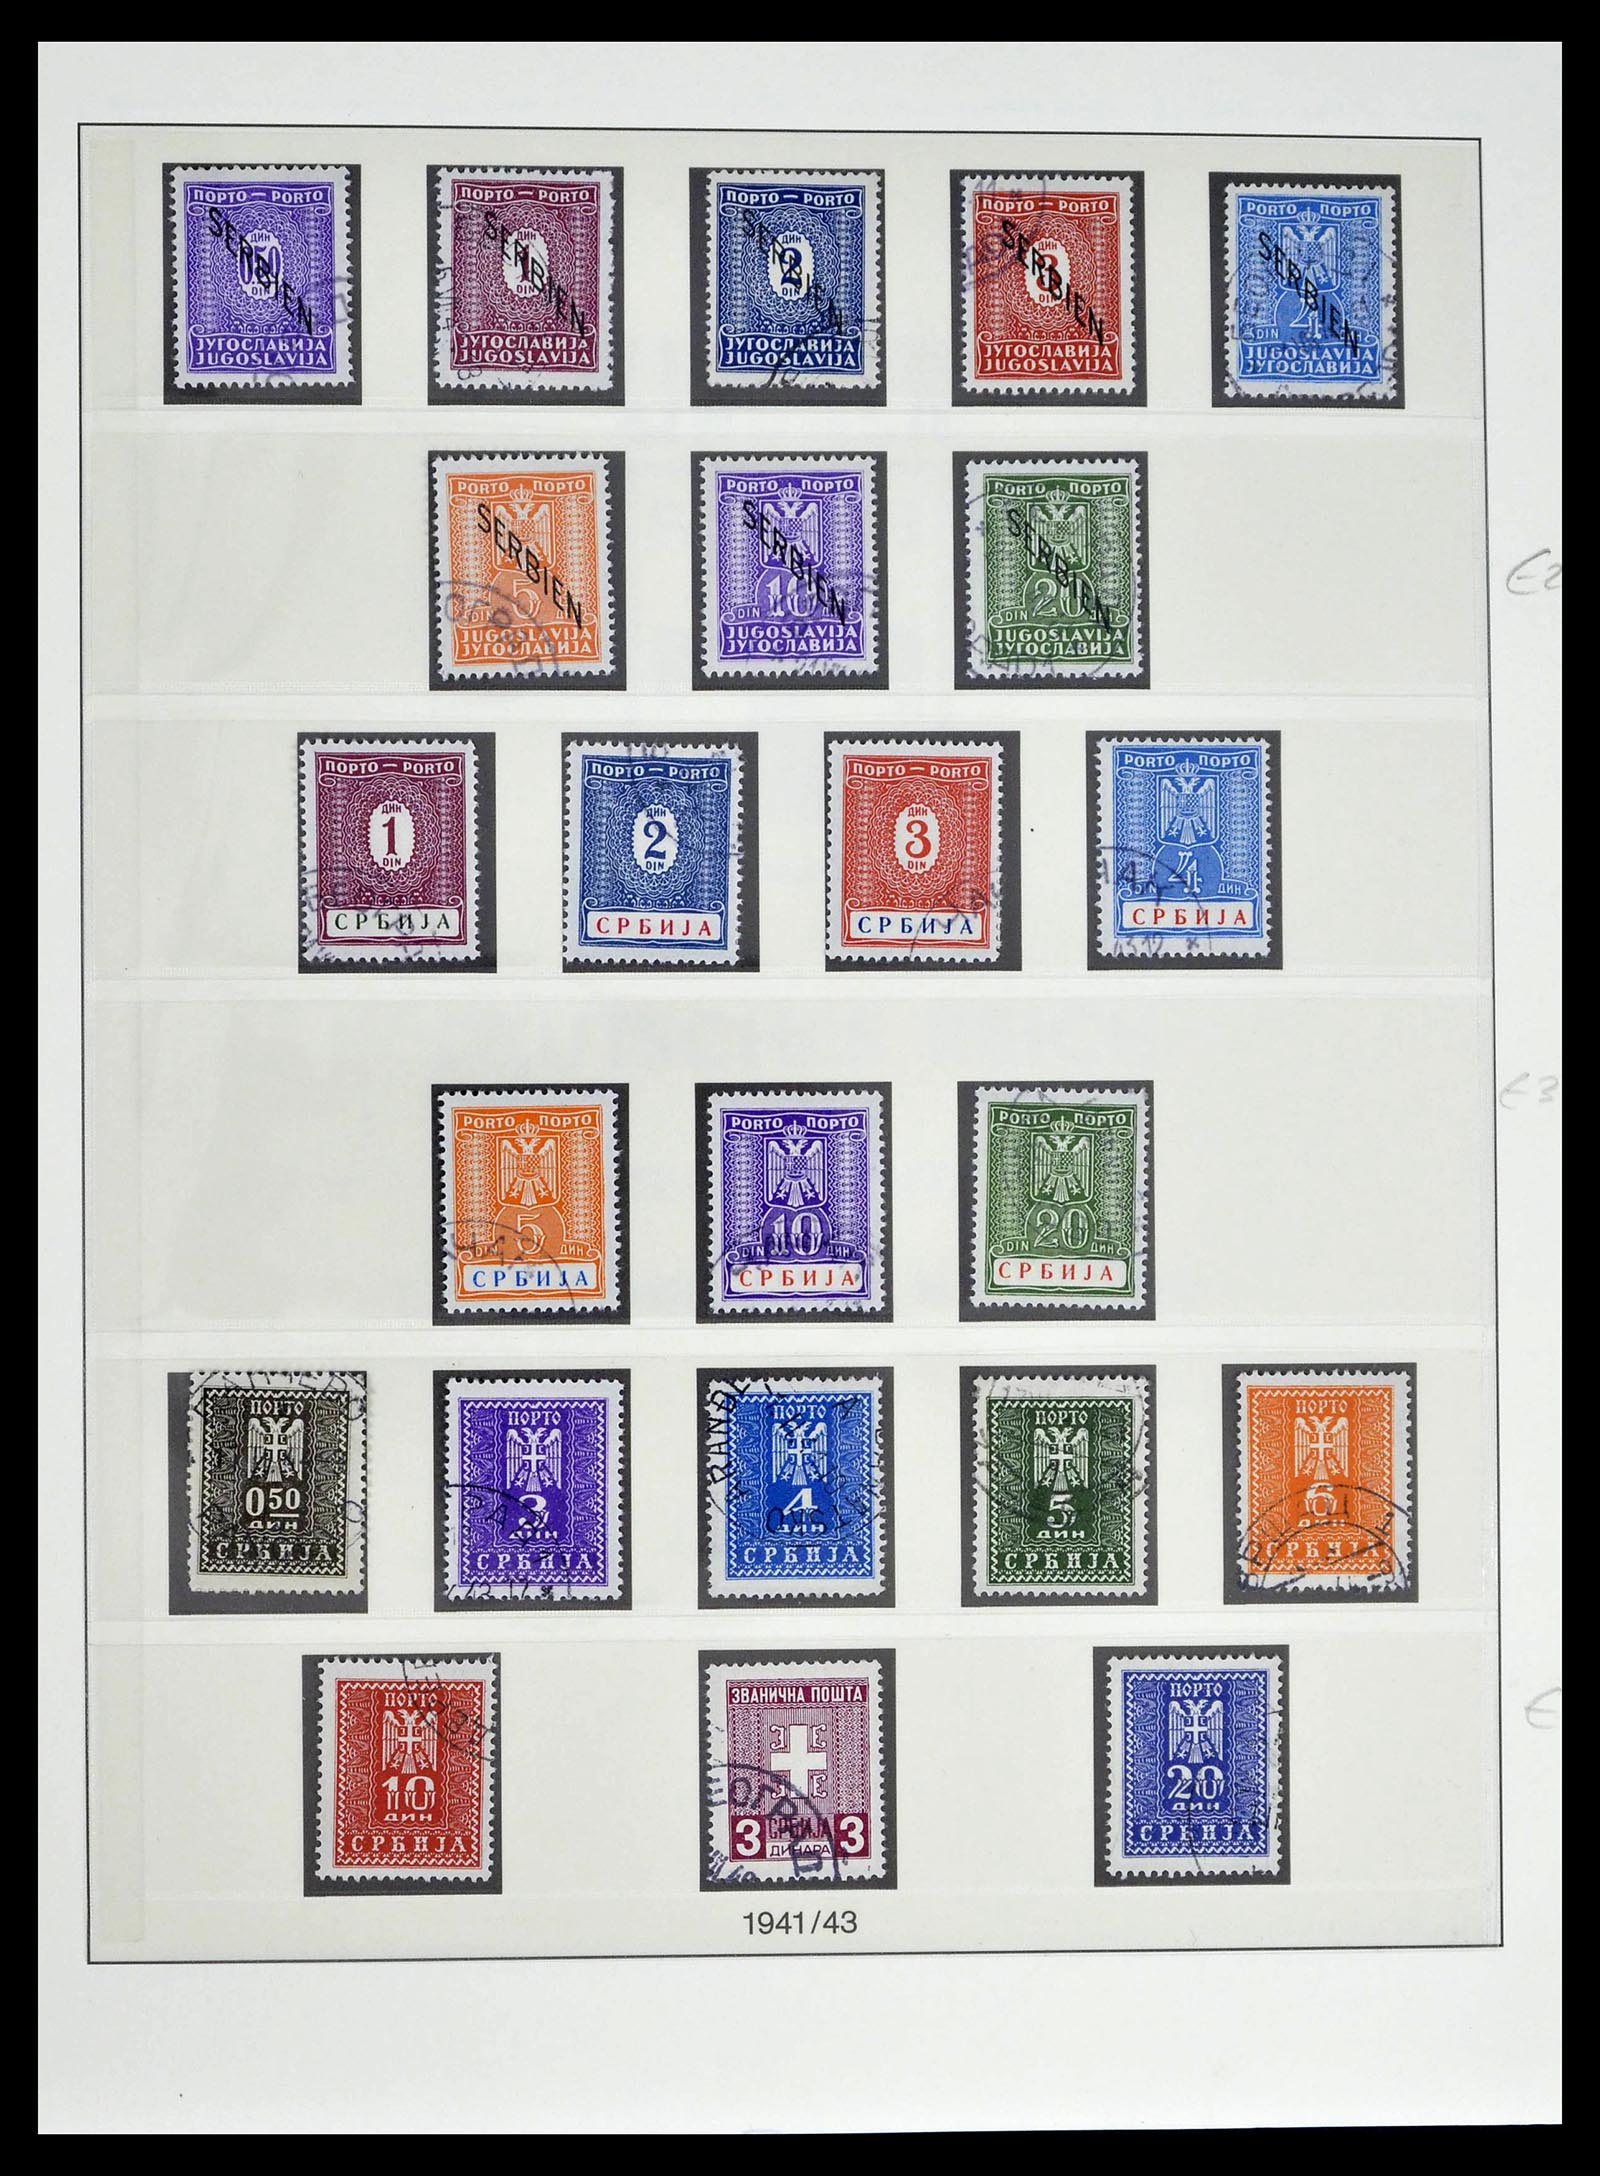 39396 0029 - Stamp collection 39396 German occupation WW II 1939-1945.